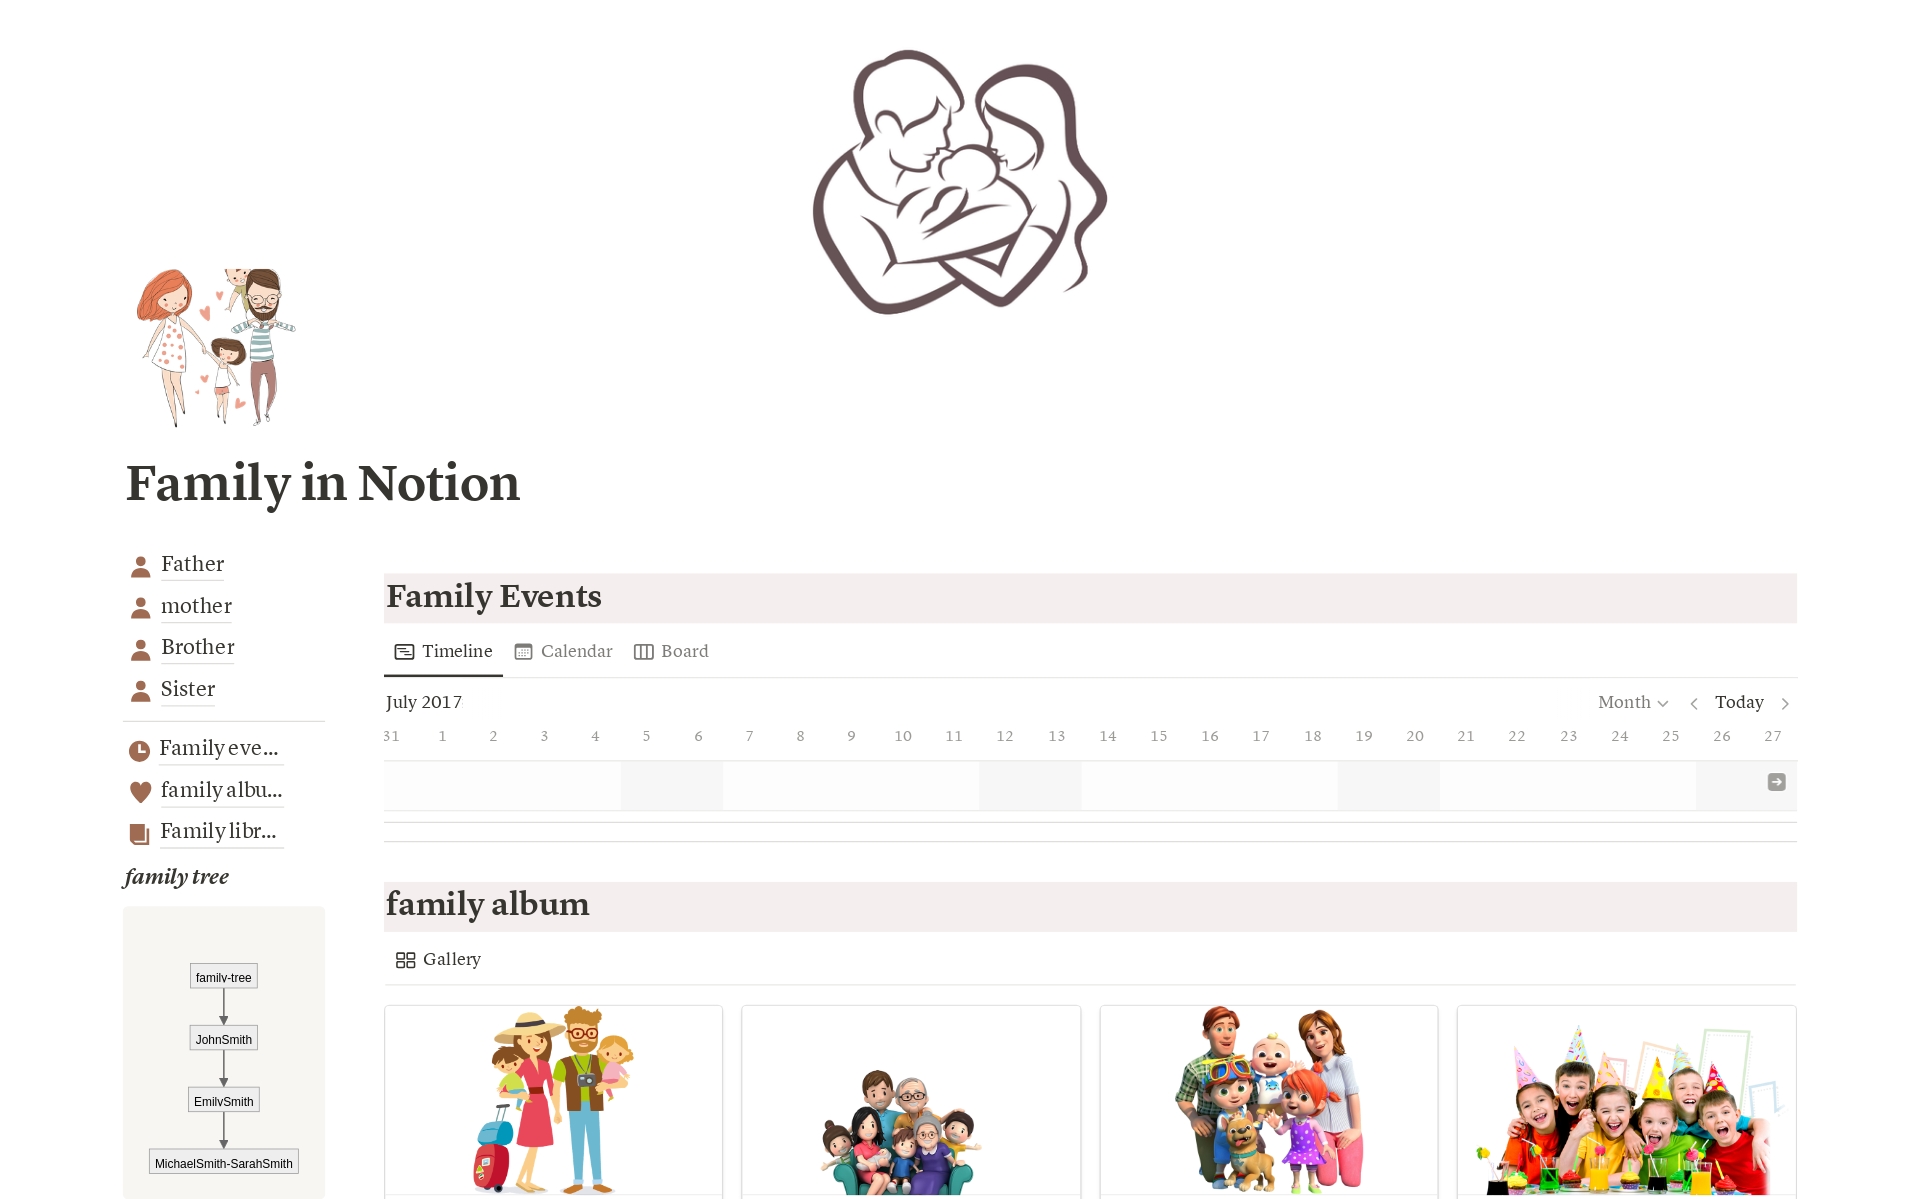 The "Family" template in Notion is an efficient tool designed to organize family information in a structured and organized manner. 